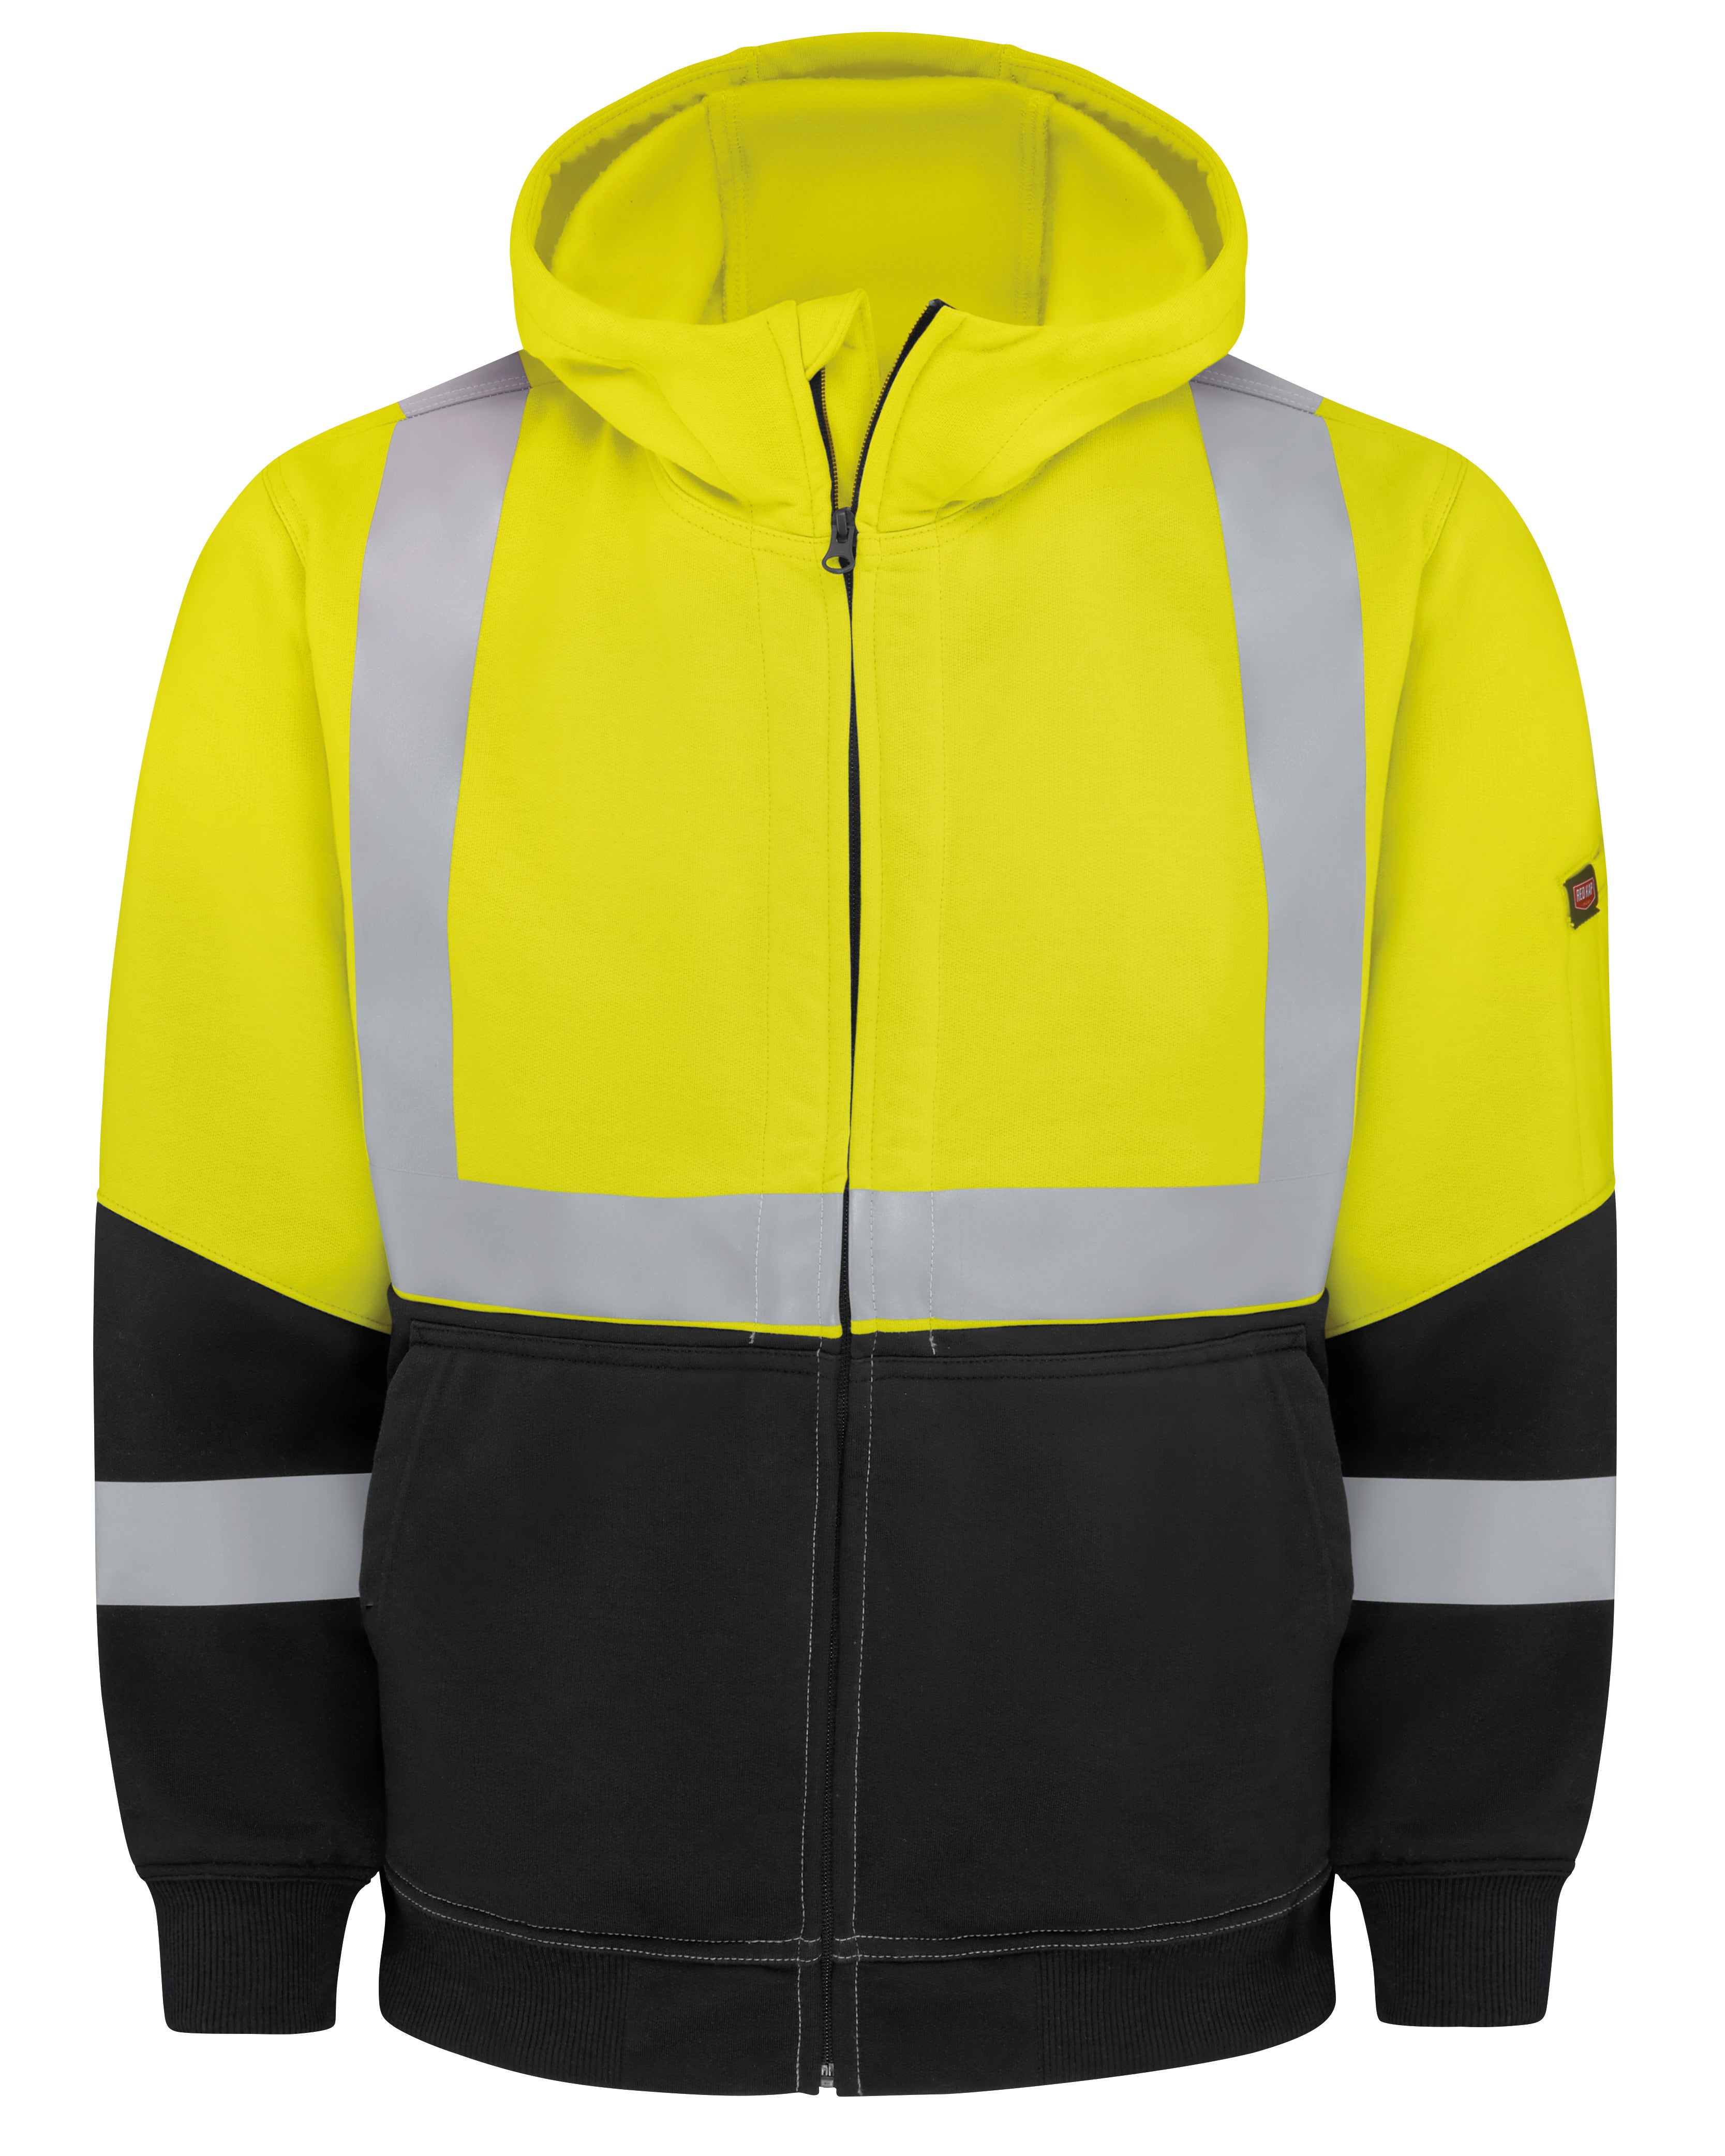 Hi-Visibility Performance Work Hoodie - Type R Class 2 HJ10 - Black & Hi Visibility Yellow-eSafety Supplies, Inc